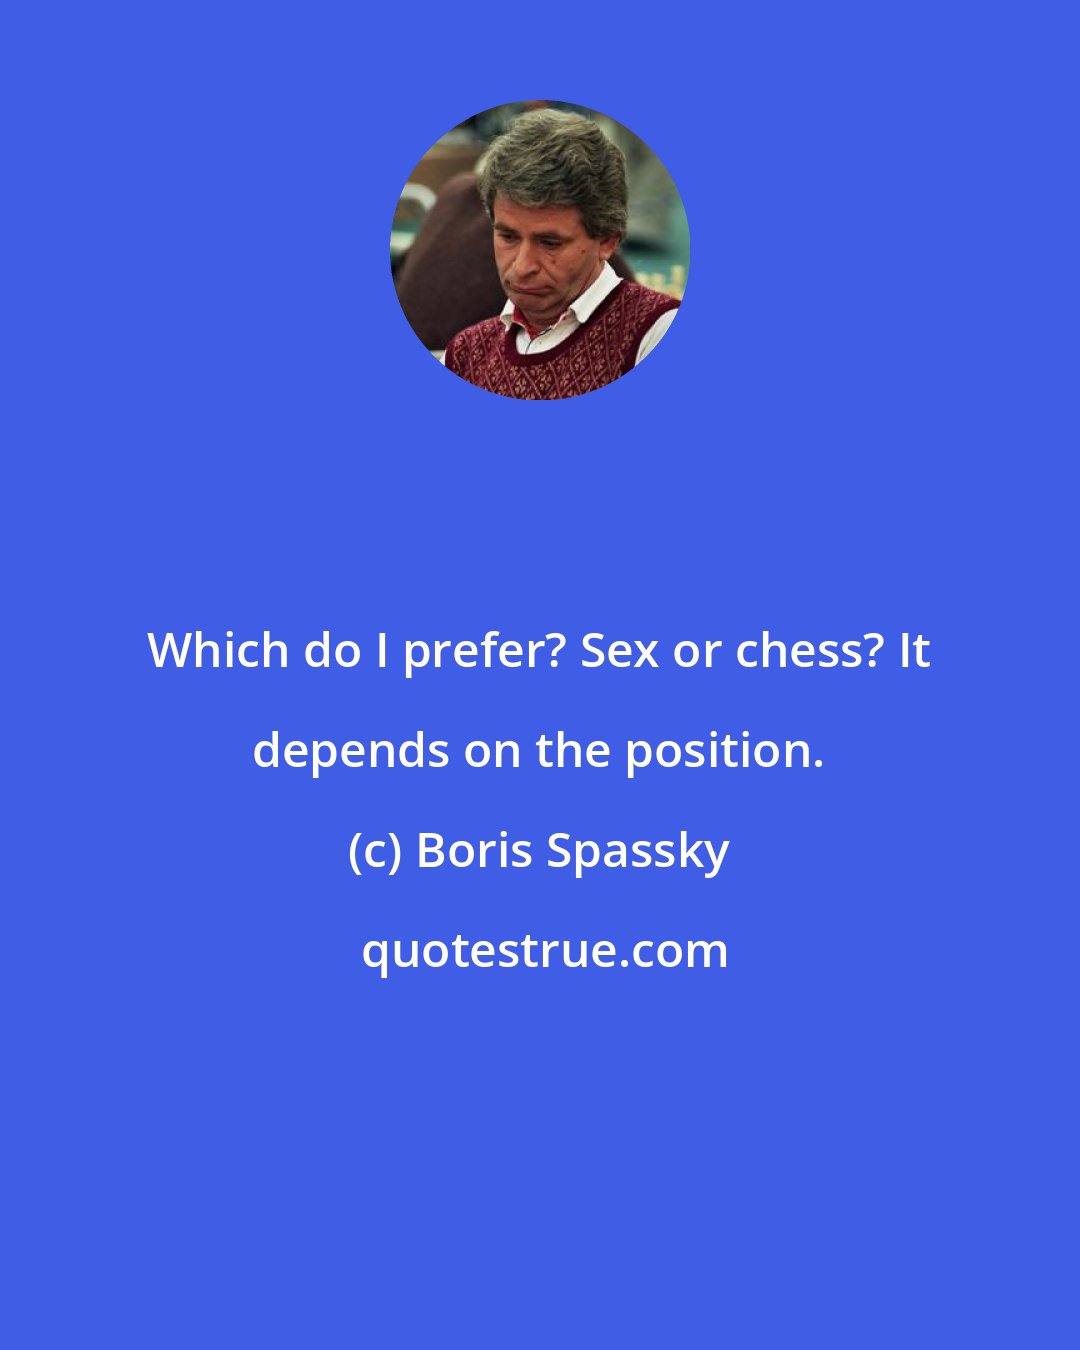 Boris Spassky: Which do I prefer? Sex or chess? It depends on the position.